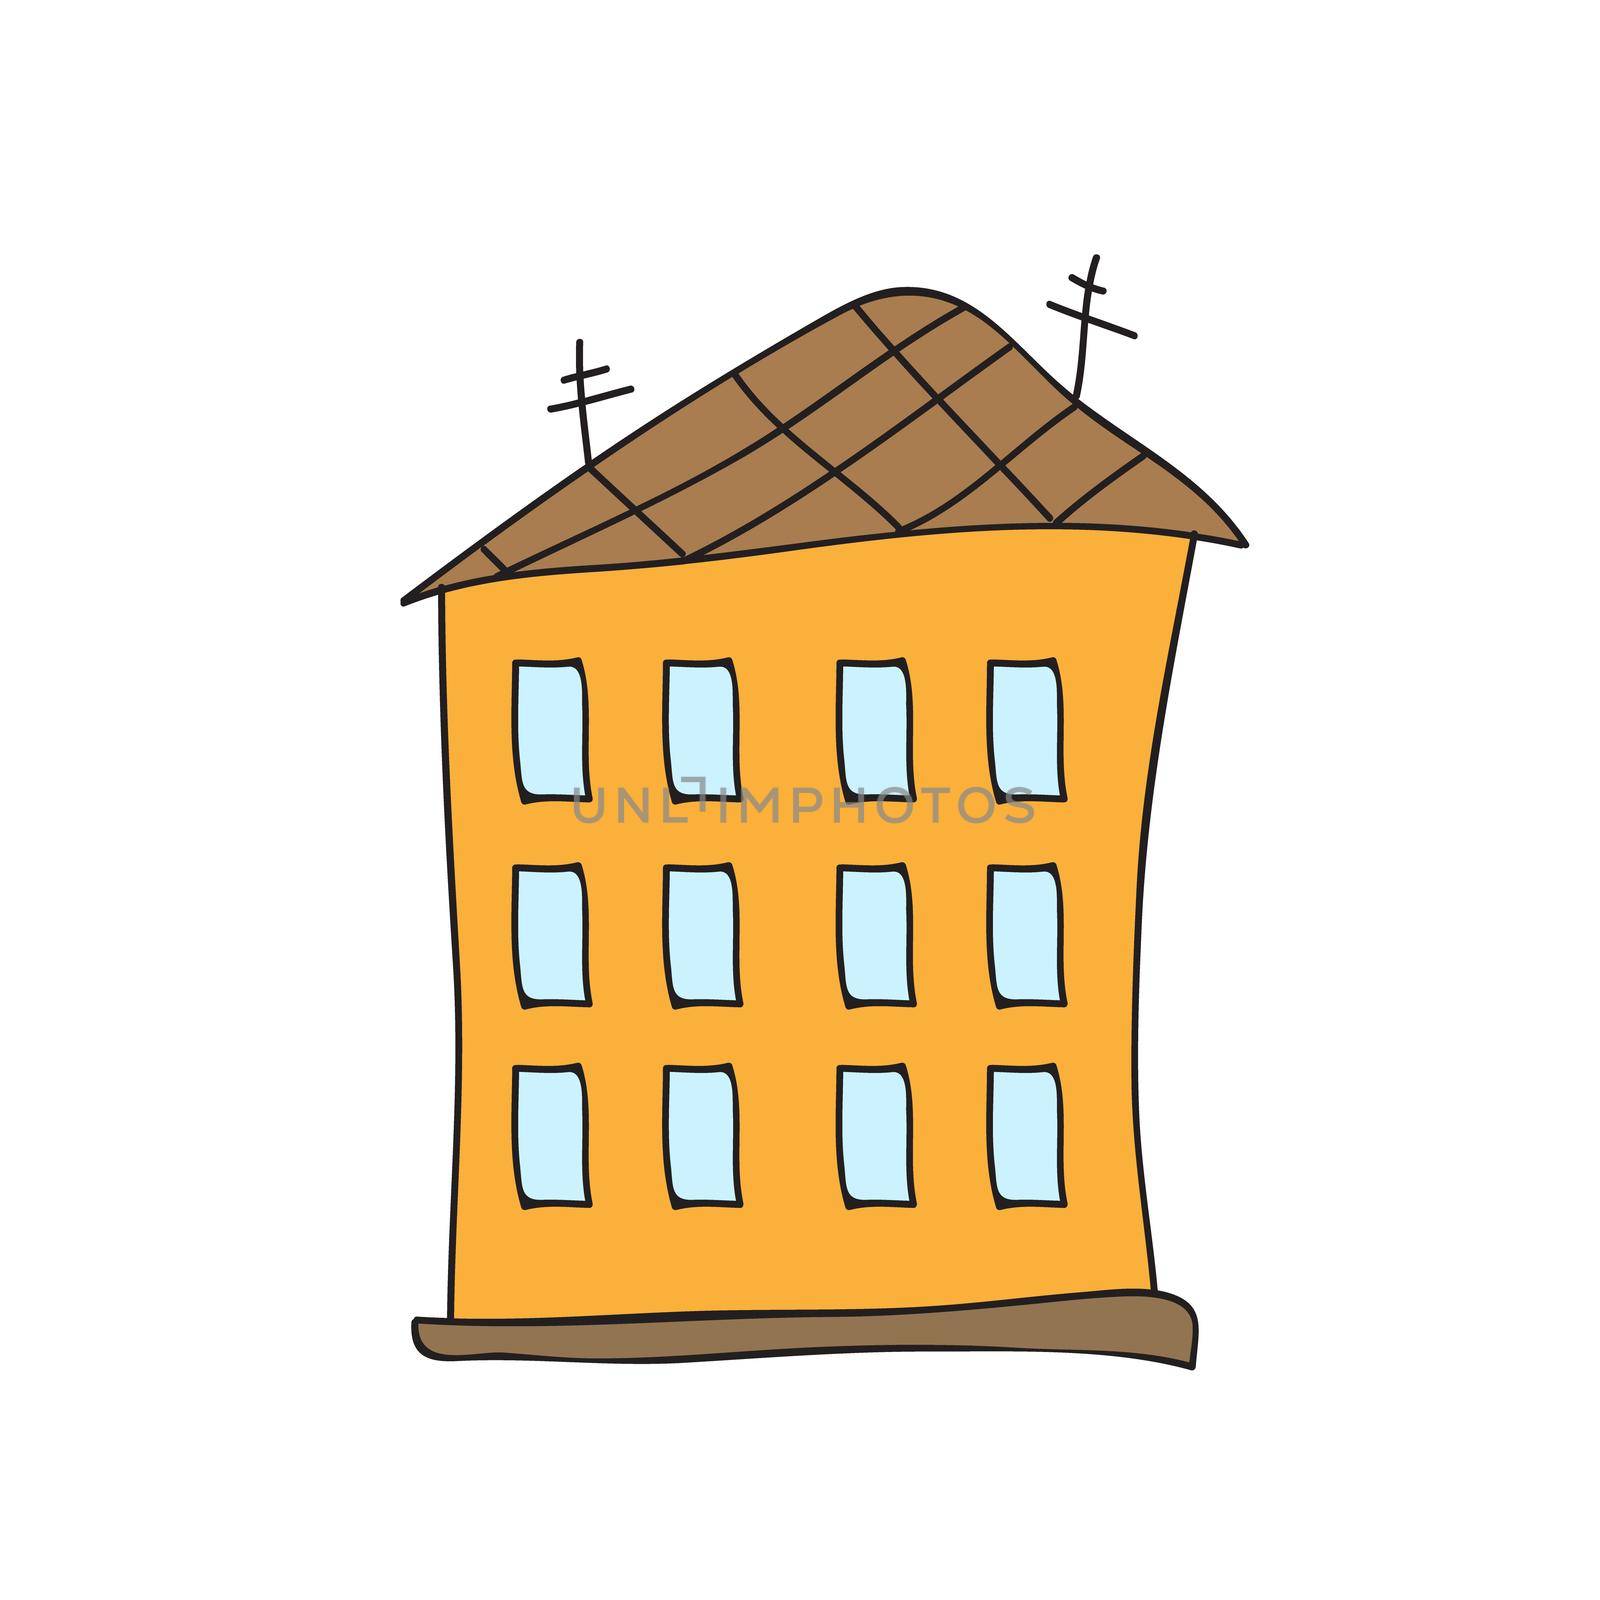 Multi storey building on white background. Simple cartoon town cityscape by natali_brill